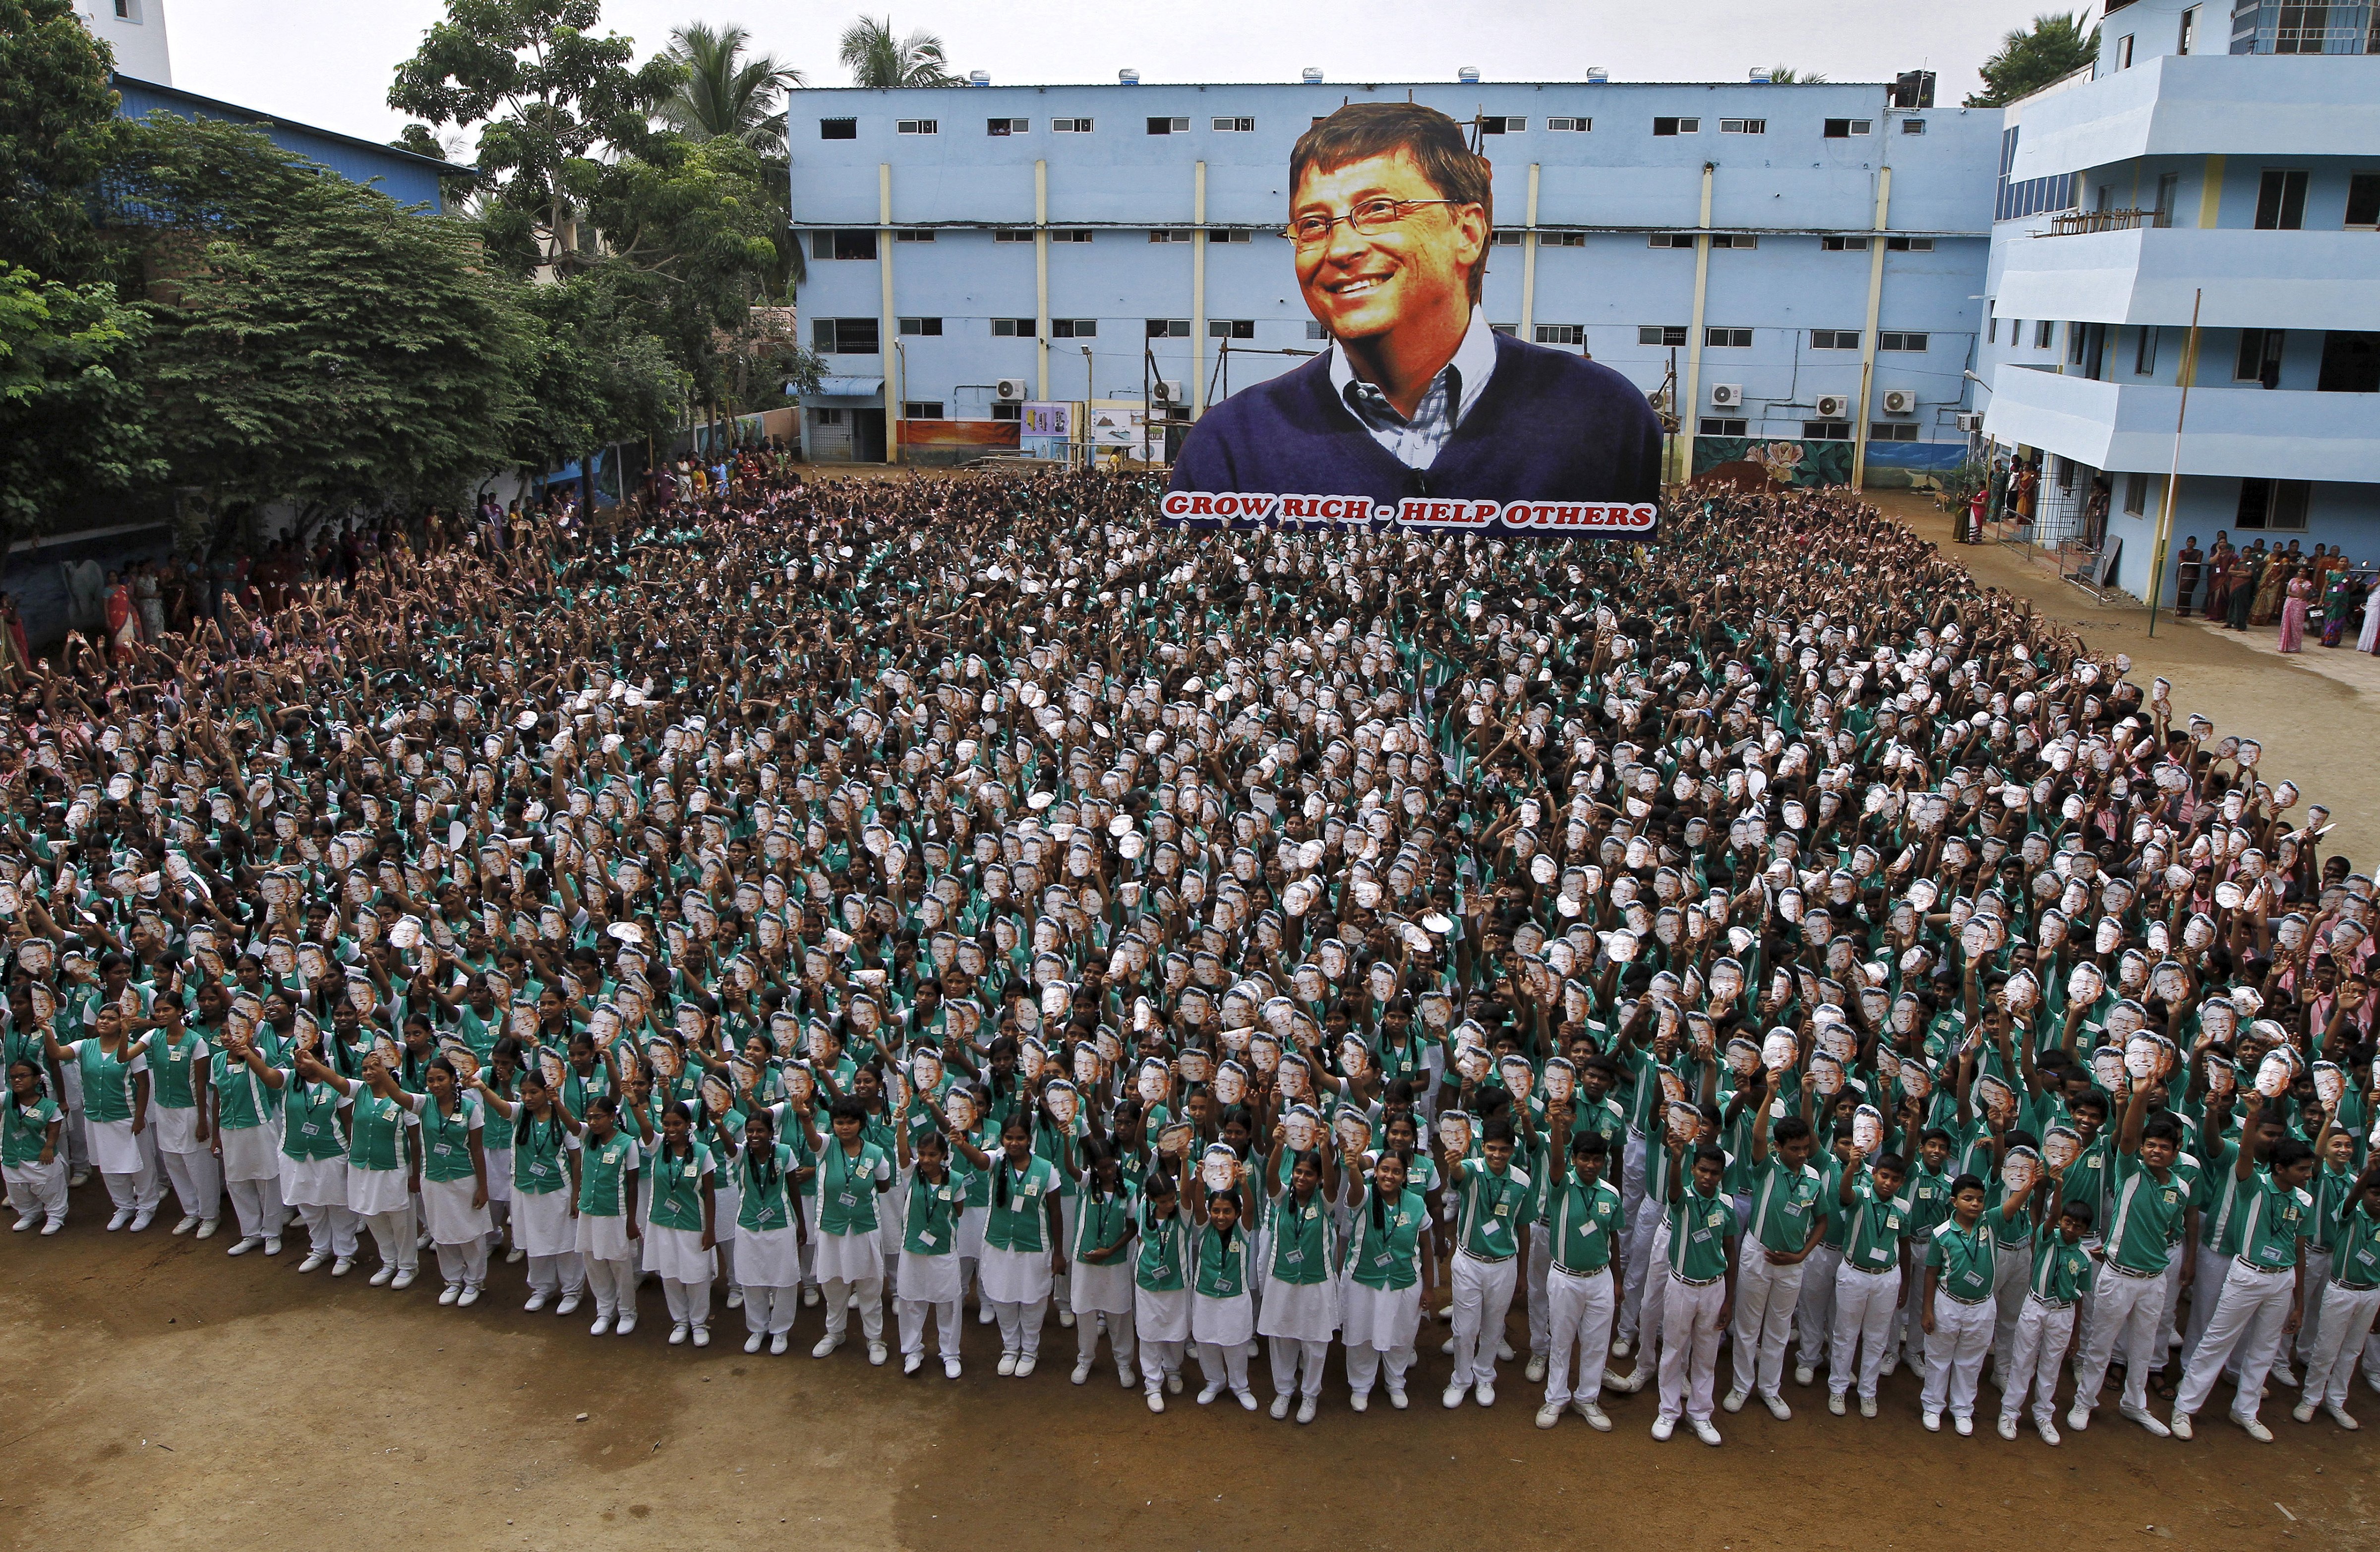 School children hold portraits of Microsoft co-founder Bill Gates in front of a giant picture of Gates during celebrations to mark his 60th birthday inside the school premises in Chennai, India on Oct. 28, 2015.